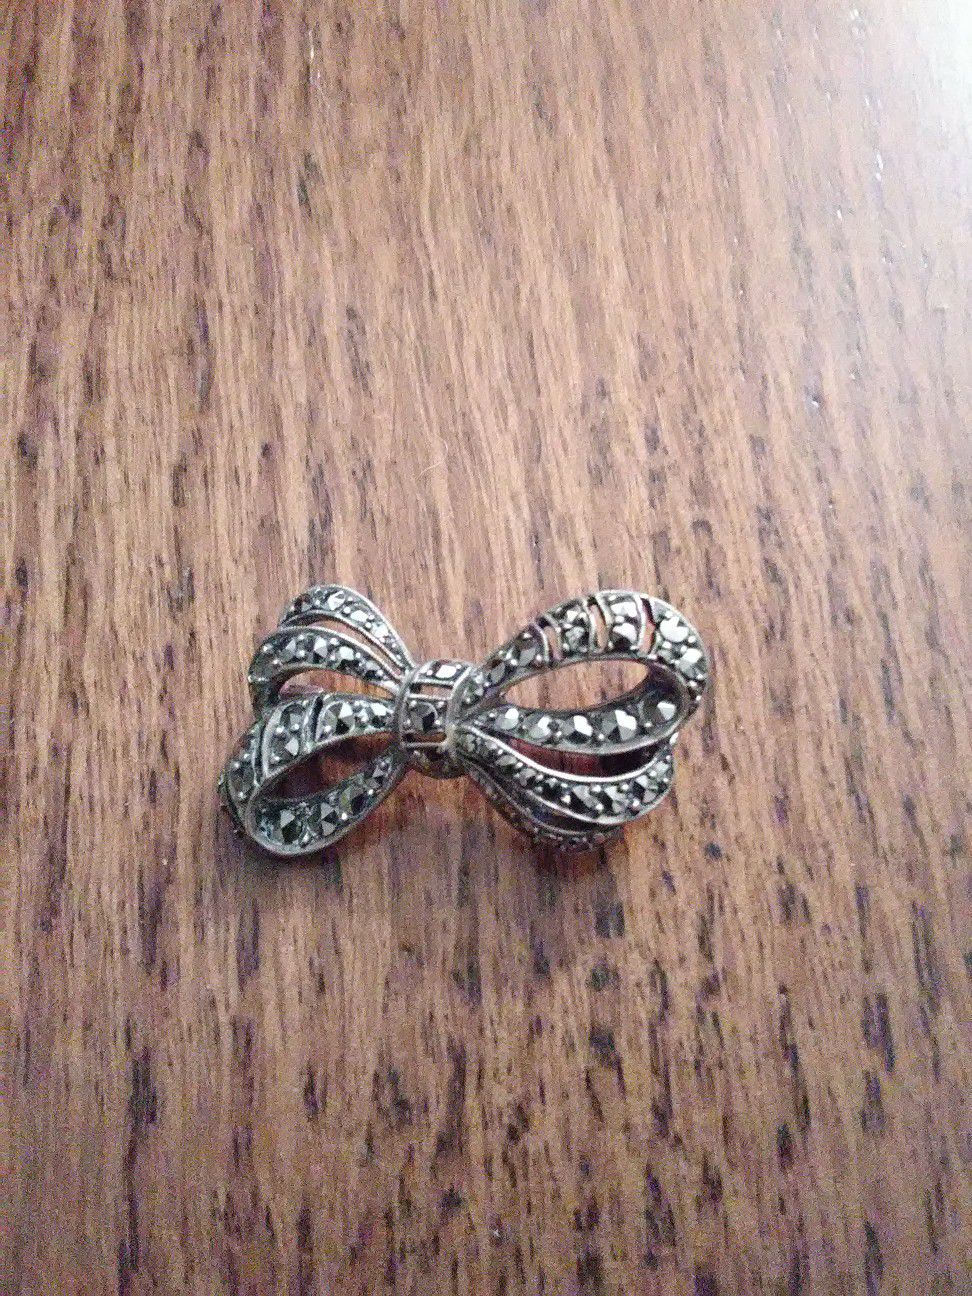 VINTAGE SILVER PIN WITH MARCASITE ACCENTS